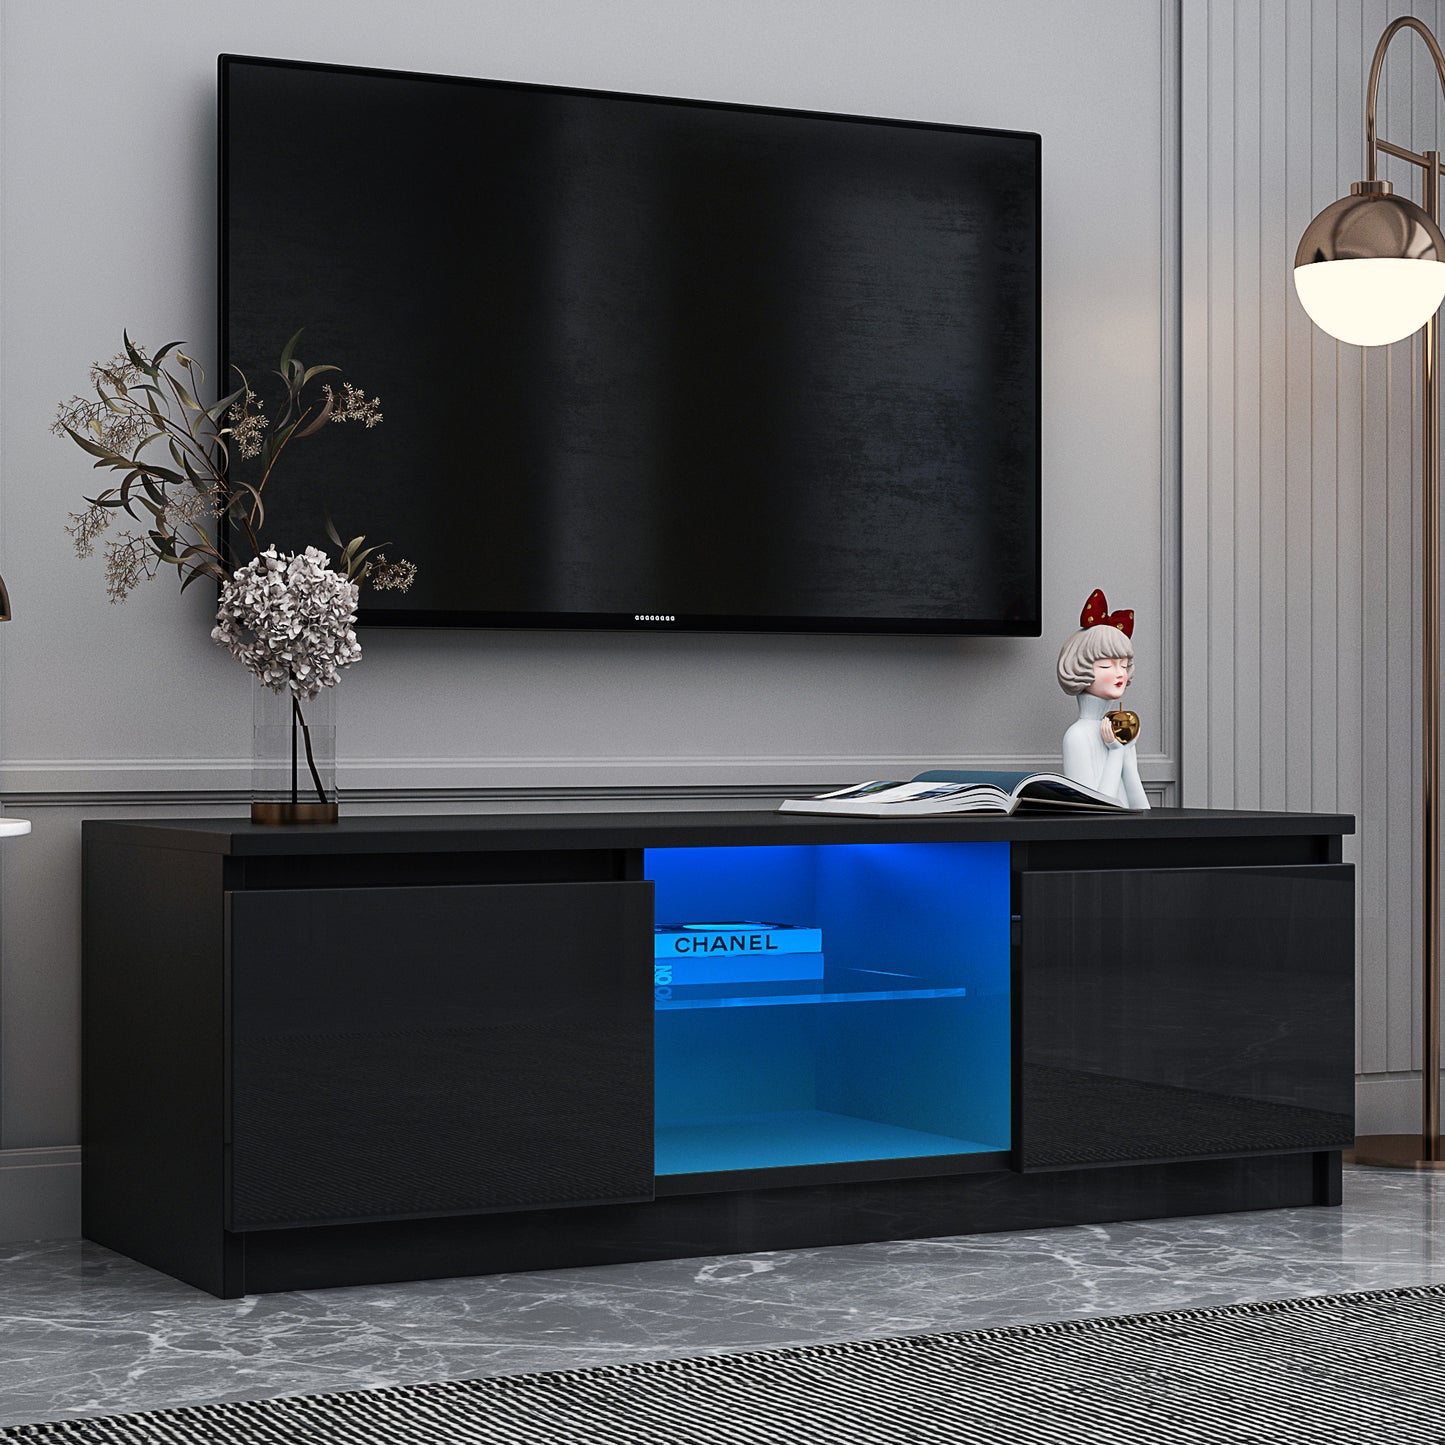 LED TV Stand for 55" TVs, HSUNNS Mid-century Entertainment Center, Media Storage Stand with 2 Drawers, 16 Color Lights, Remote Control, Storage Shelf, 47.24 x 15.75 x 15.75in, Black